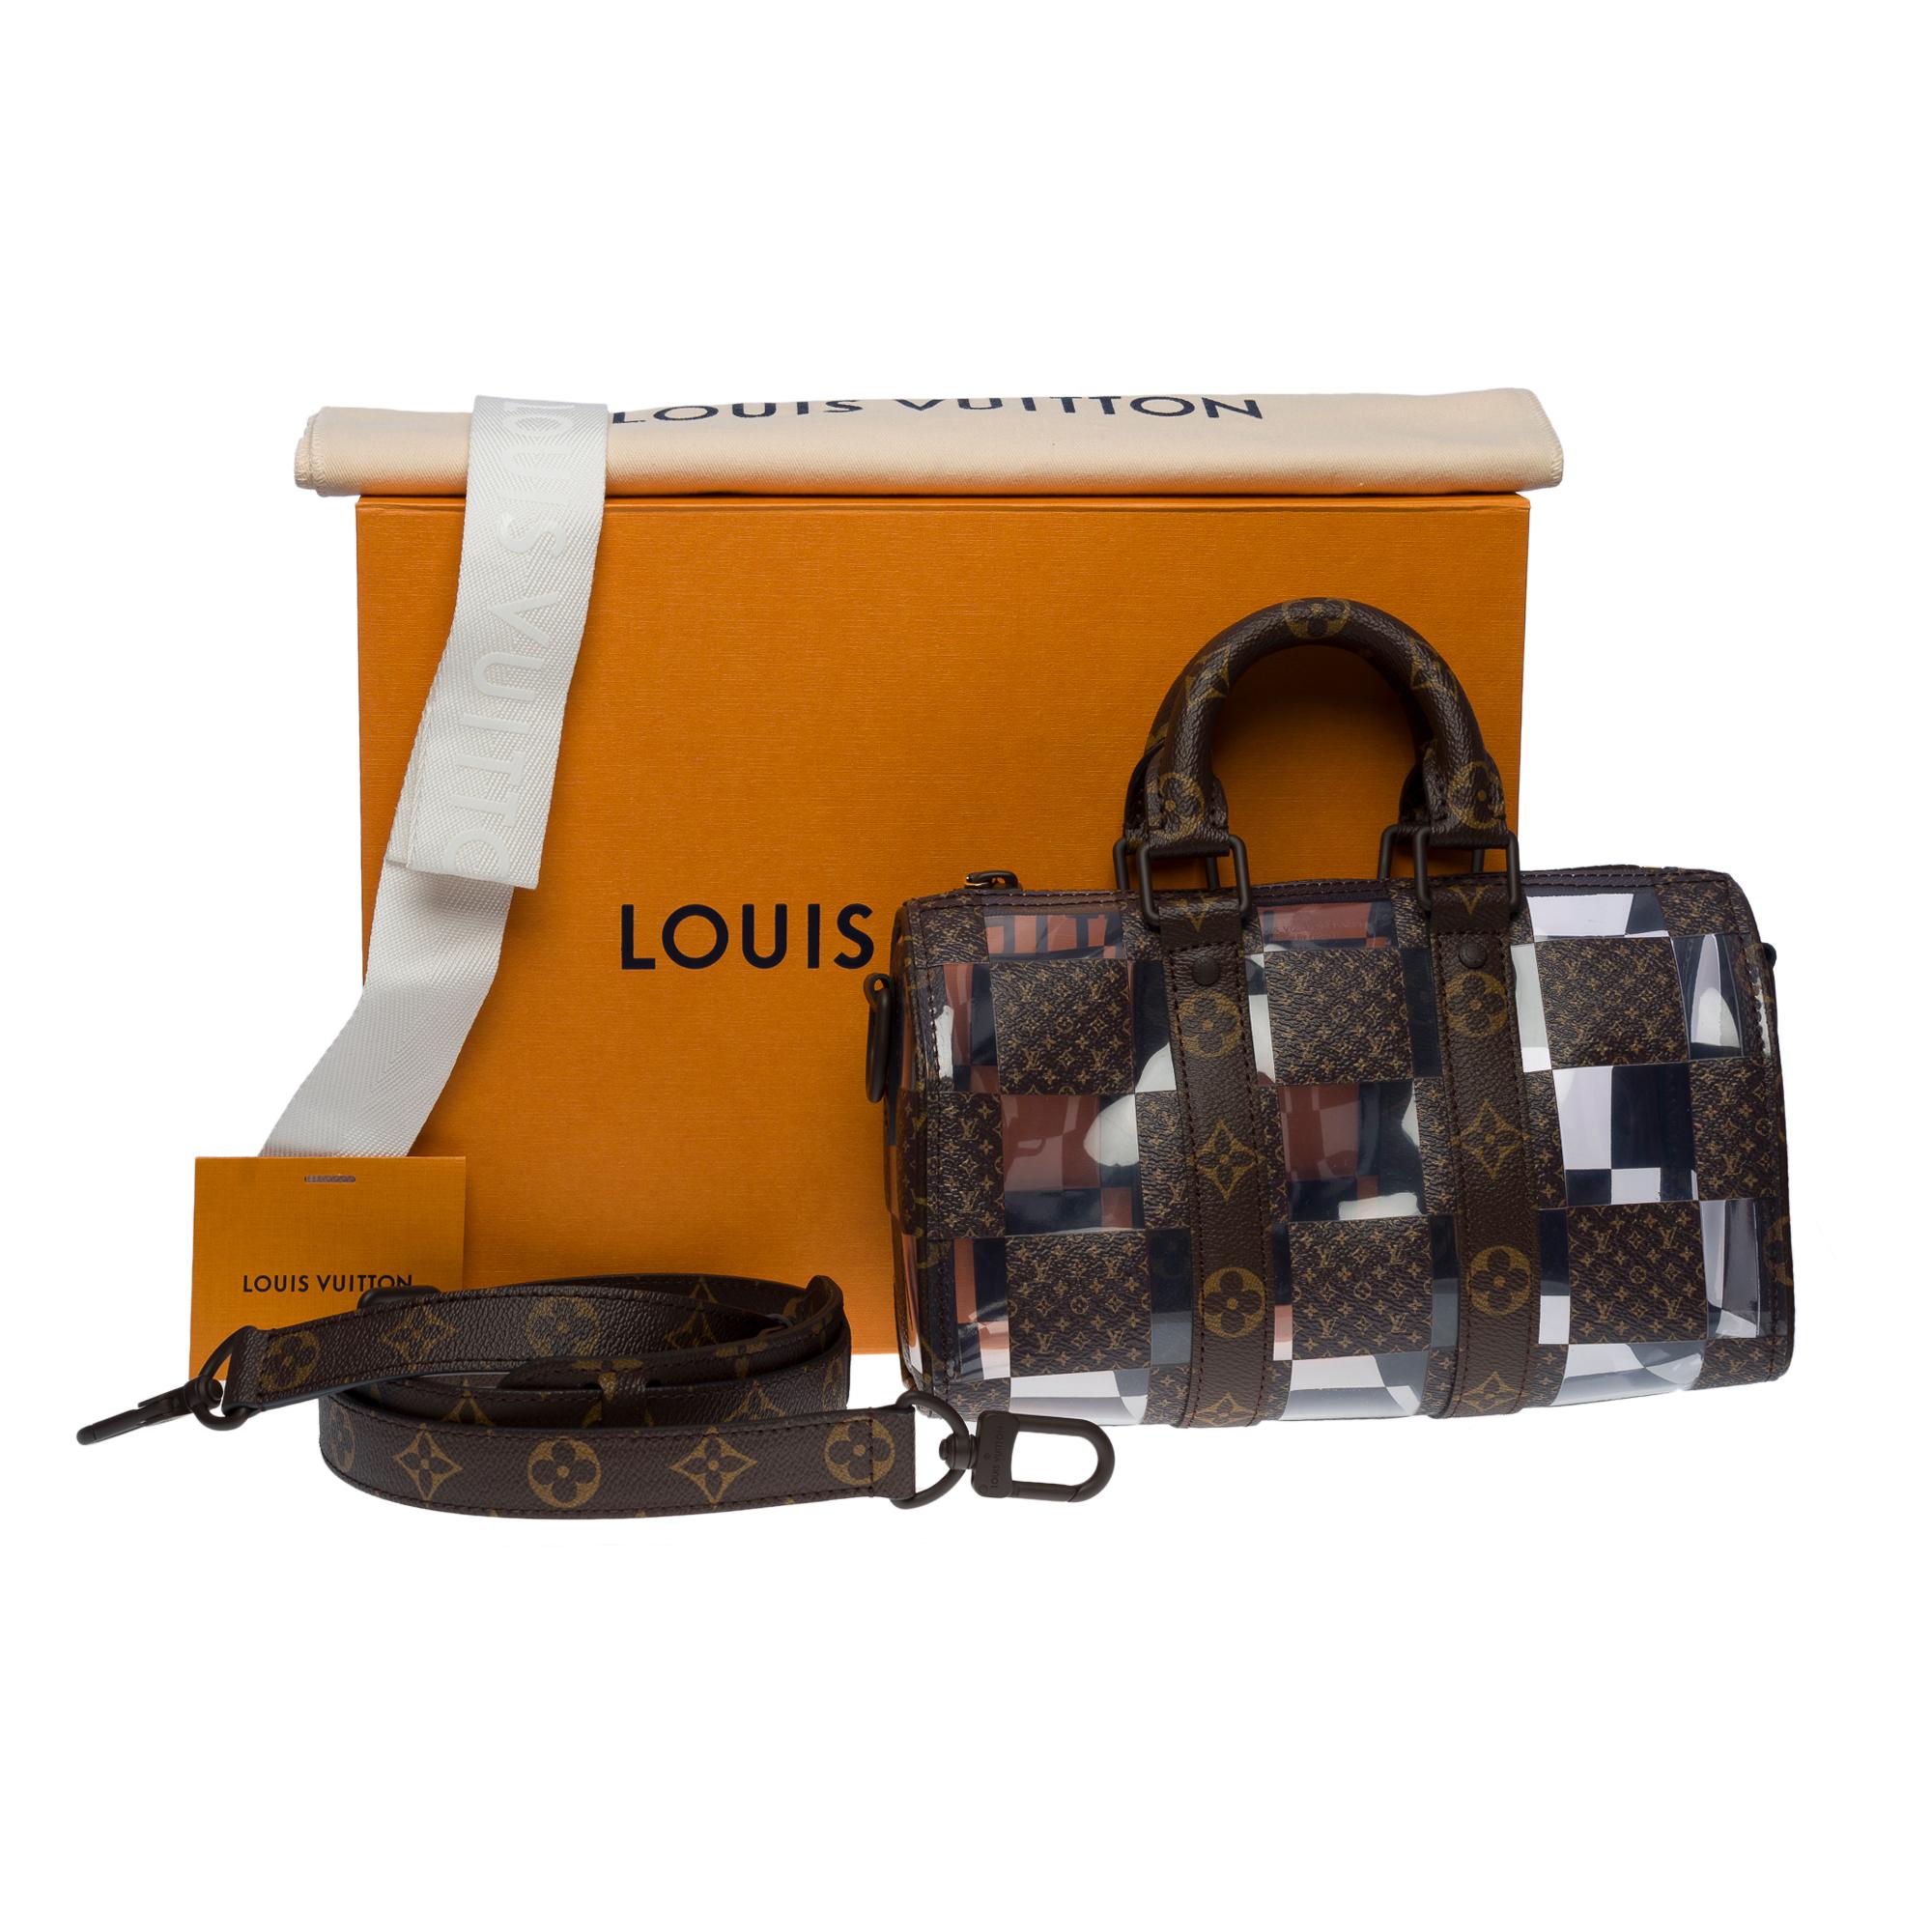 NEW-Louis Vuitton FW 2022 Chess keepall 25 strap Virgil Abloh in canvas and PVC 8